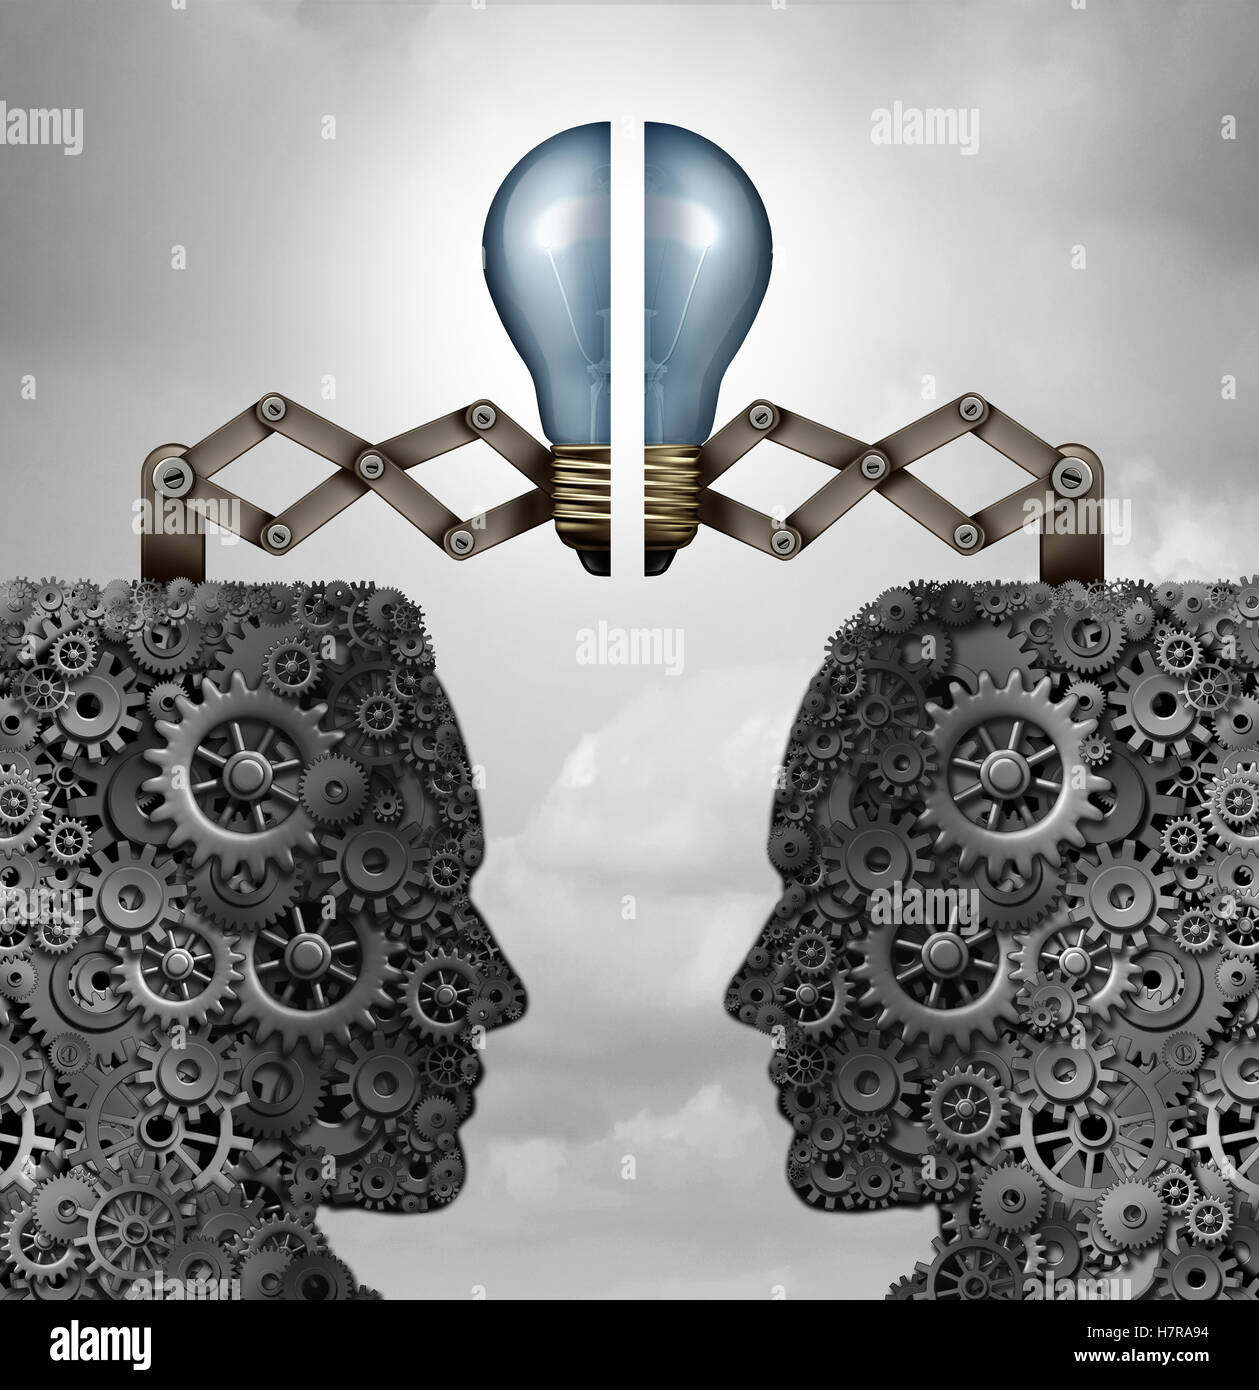 Concept of creativity partnership and creative group cooperation as a bunch of gears and cogs shaped as open minded heads with a lightbulb puzzle connecting together as a 3D illustration. Stock Photo